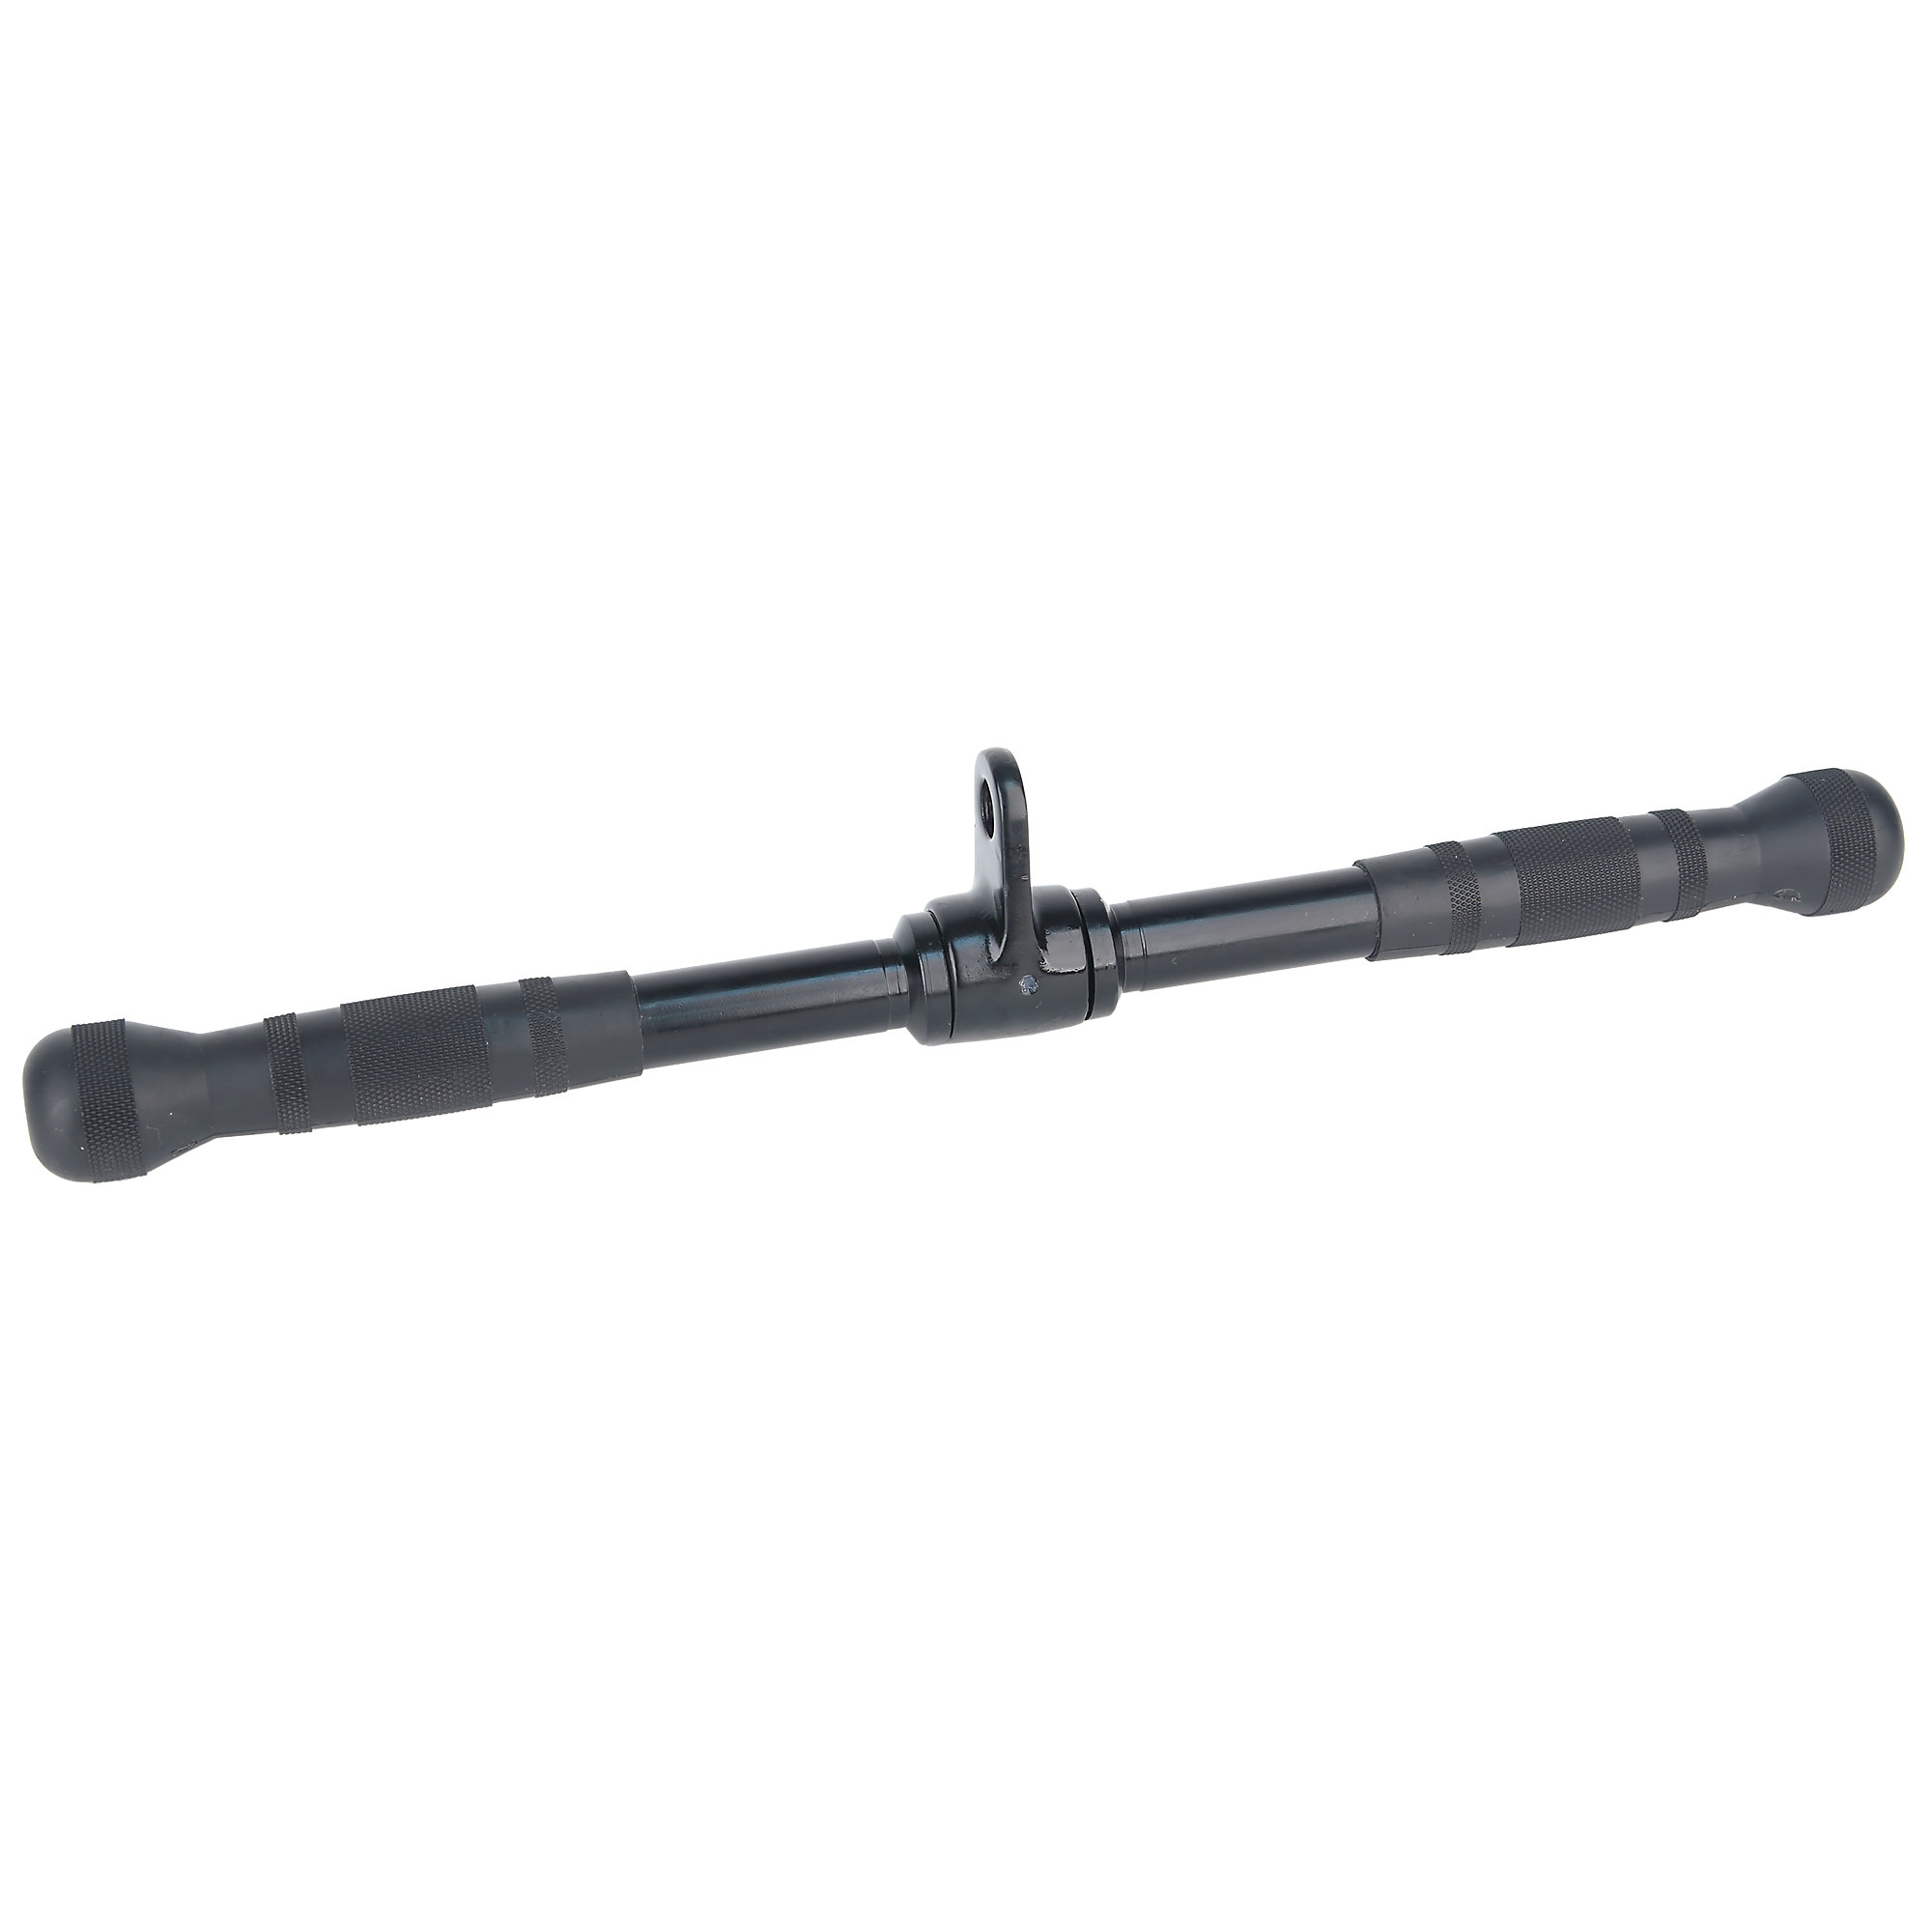 Straight Attachment Bar, Revolving Swivel and Rubber Grips, All Black